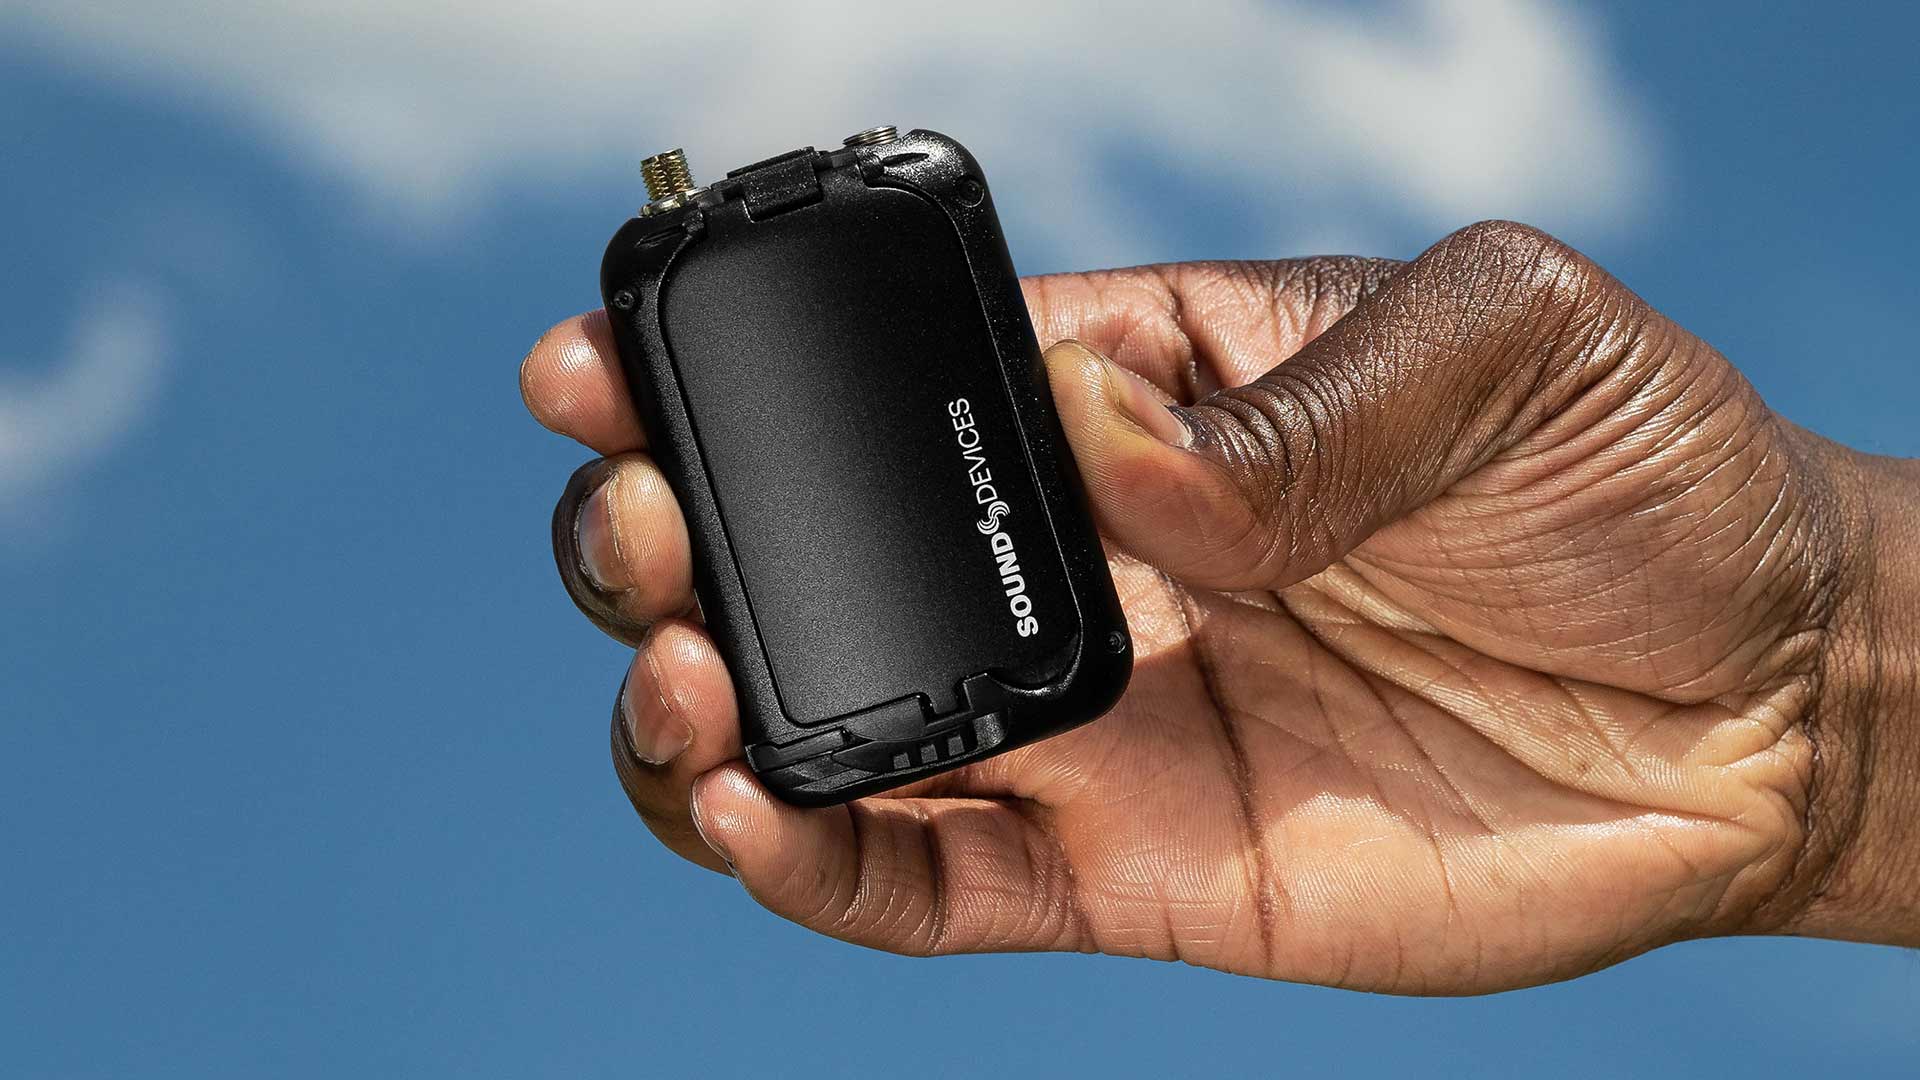 The new Sound Devices A20 Mini. Image: Sound Devices.